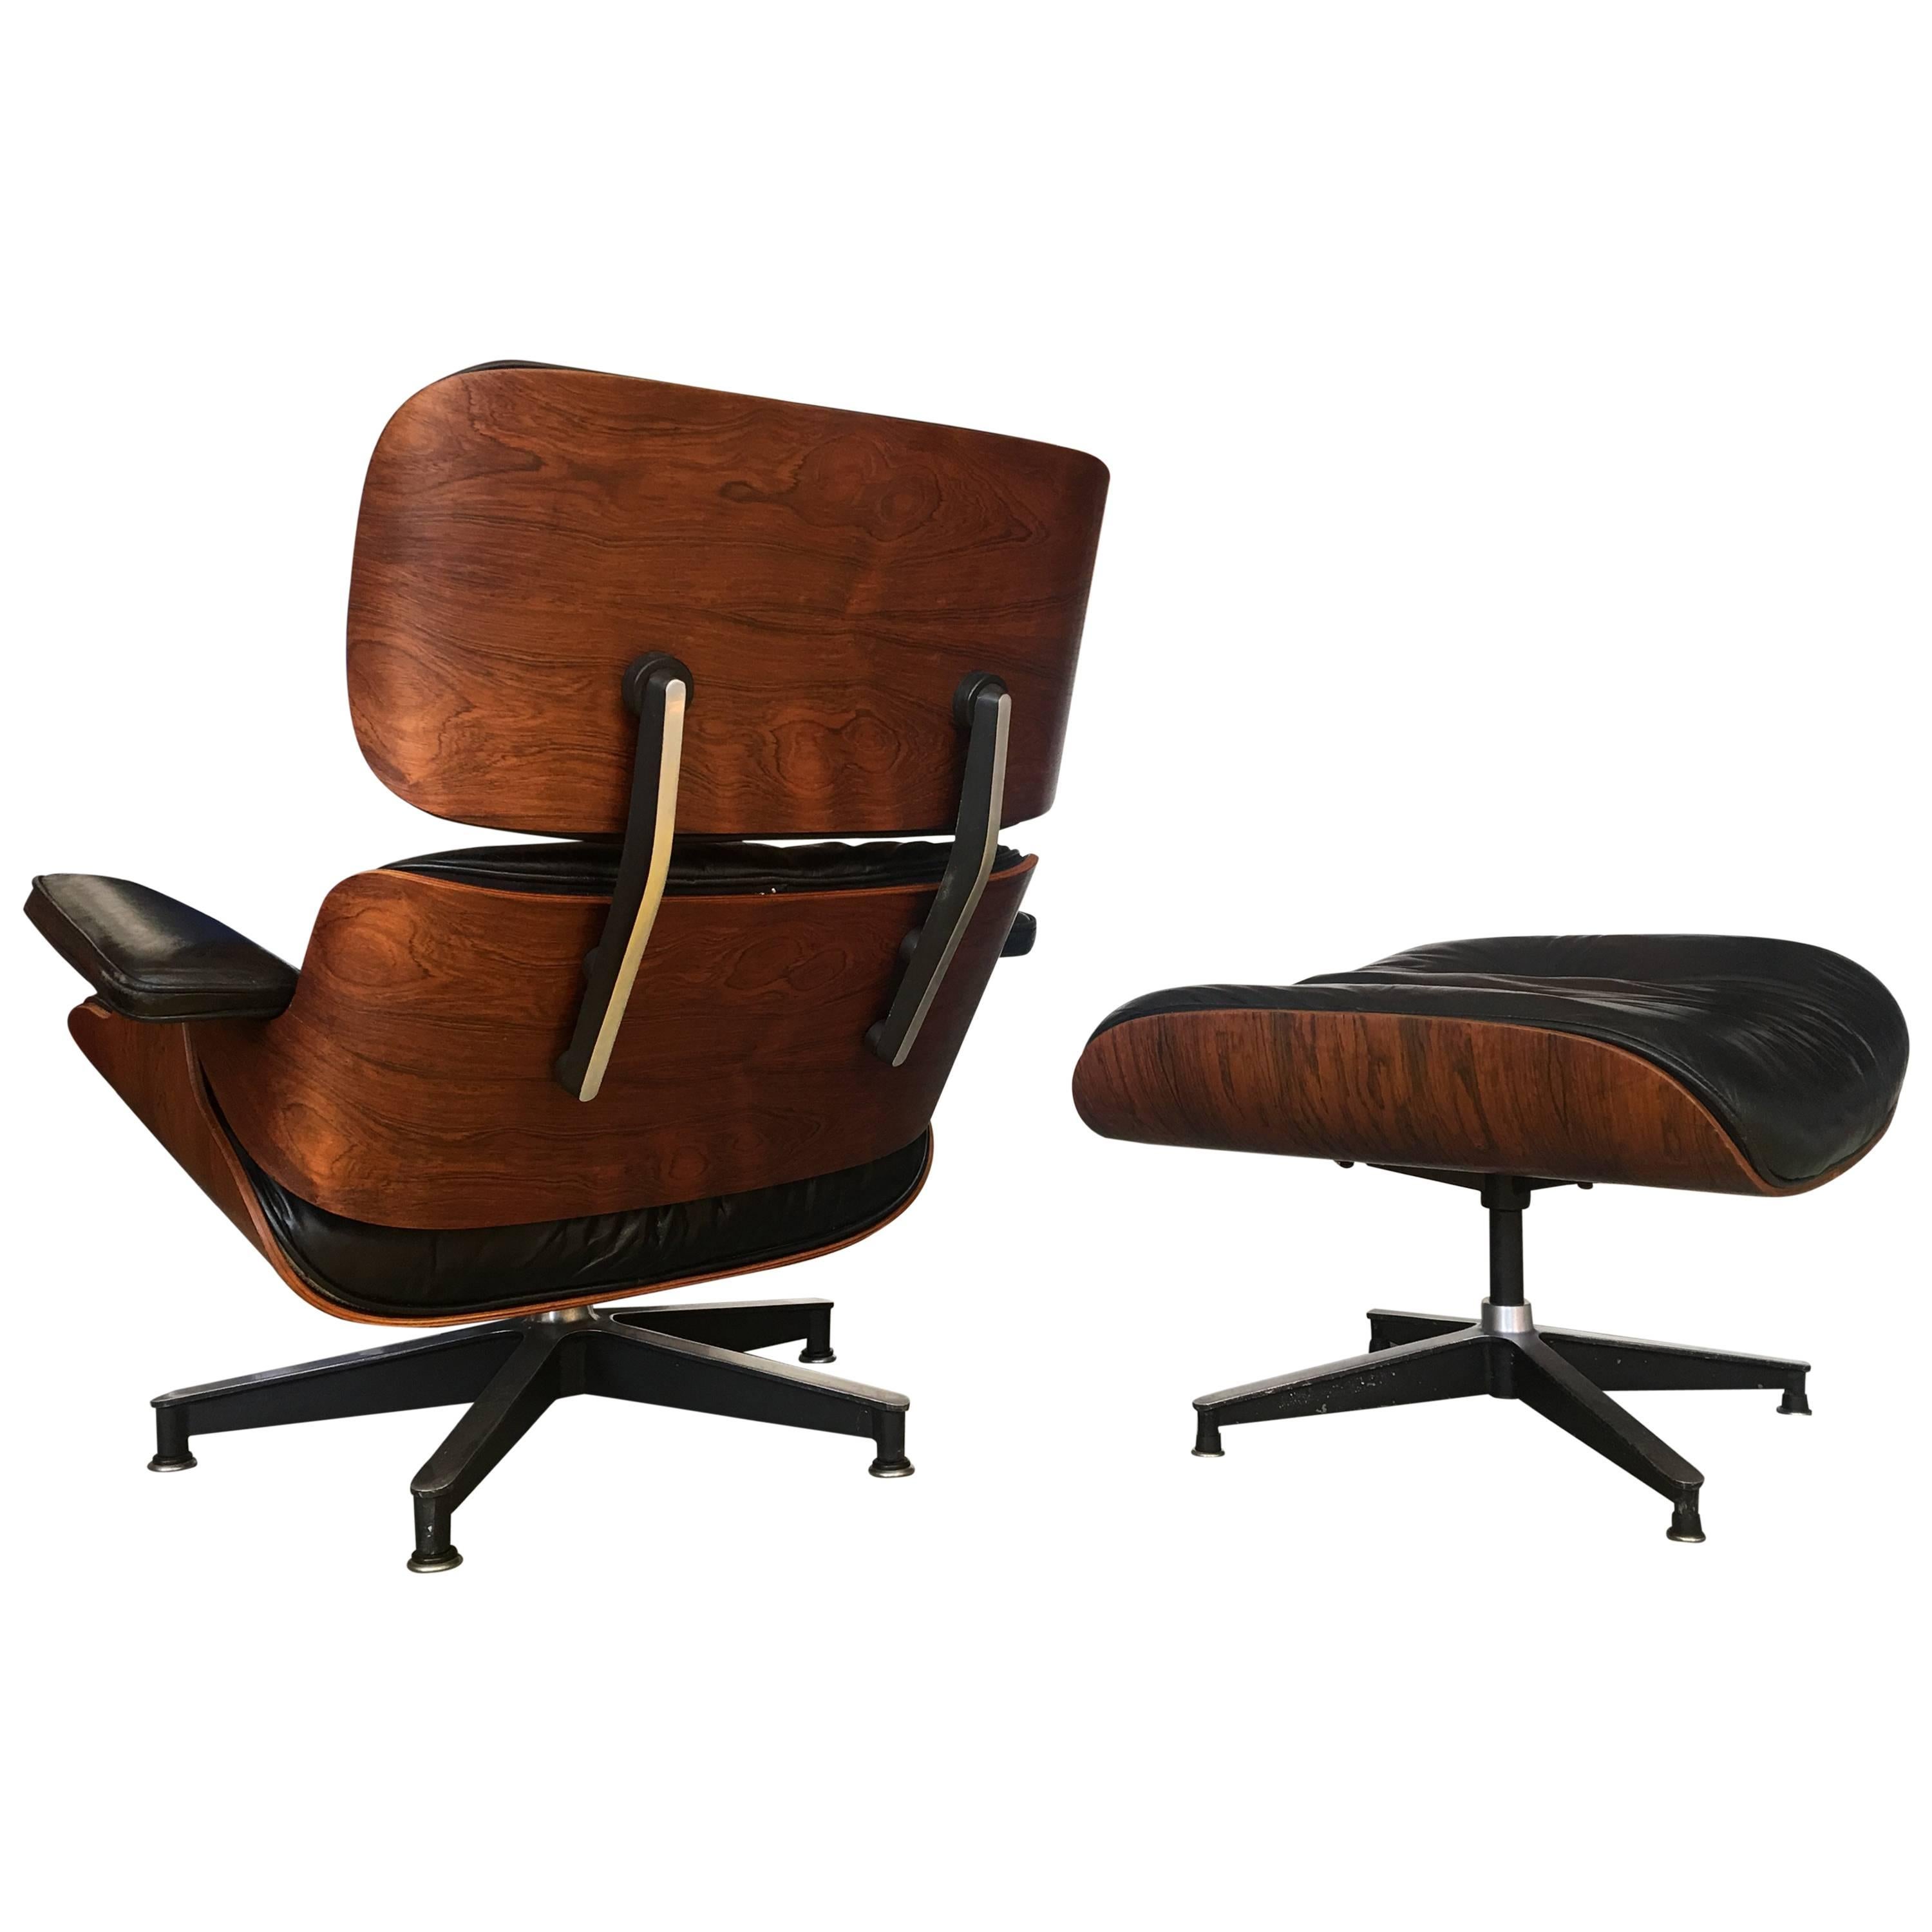 Rare 1st Year 1956, Eames Lounge with Spinning Ottoman For Sale at 1stDibs  | eames lounge chair 1956, 1956 eames chair, 1956 eames lounge chair walnut  finish